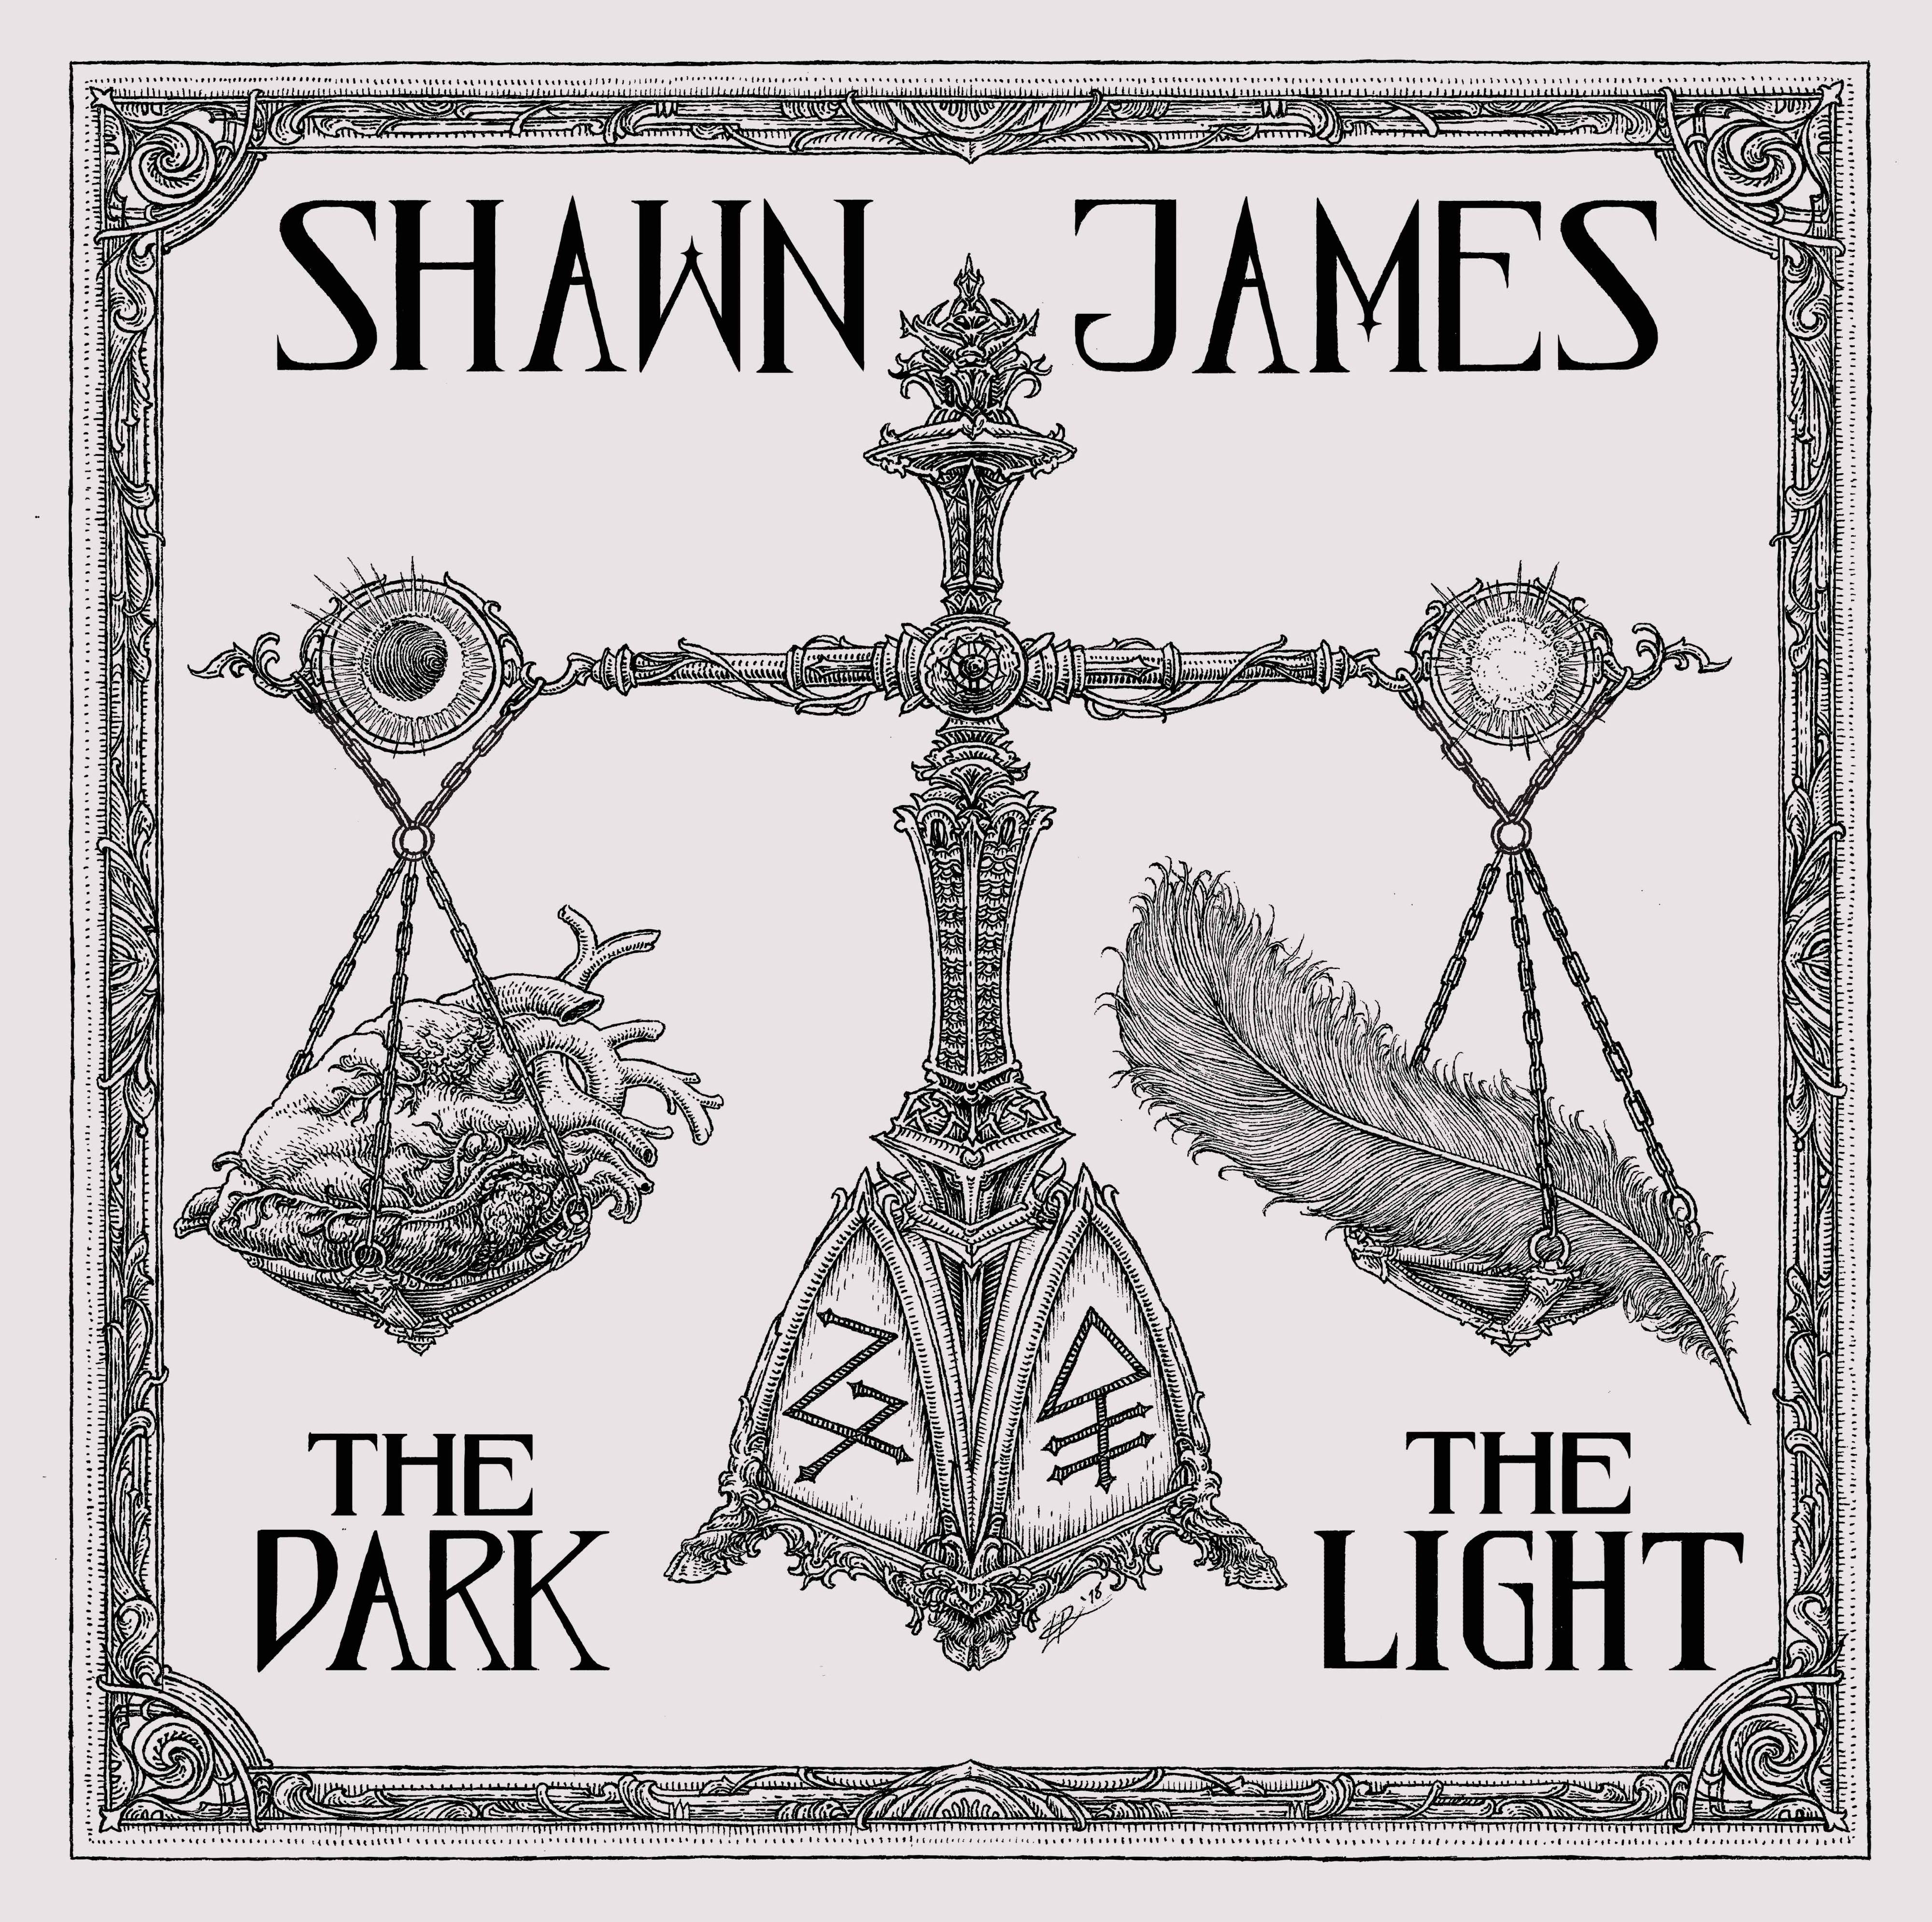 Shawn James To Release The Powerful "The Dark The Light" on March 22 – All Eyes Media